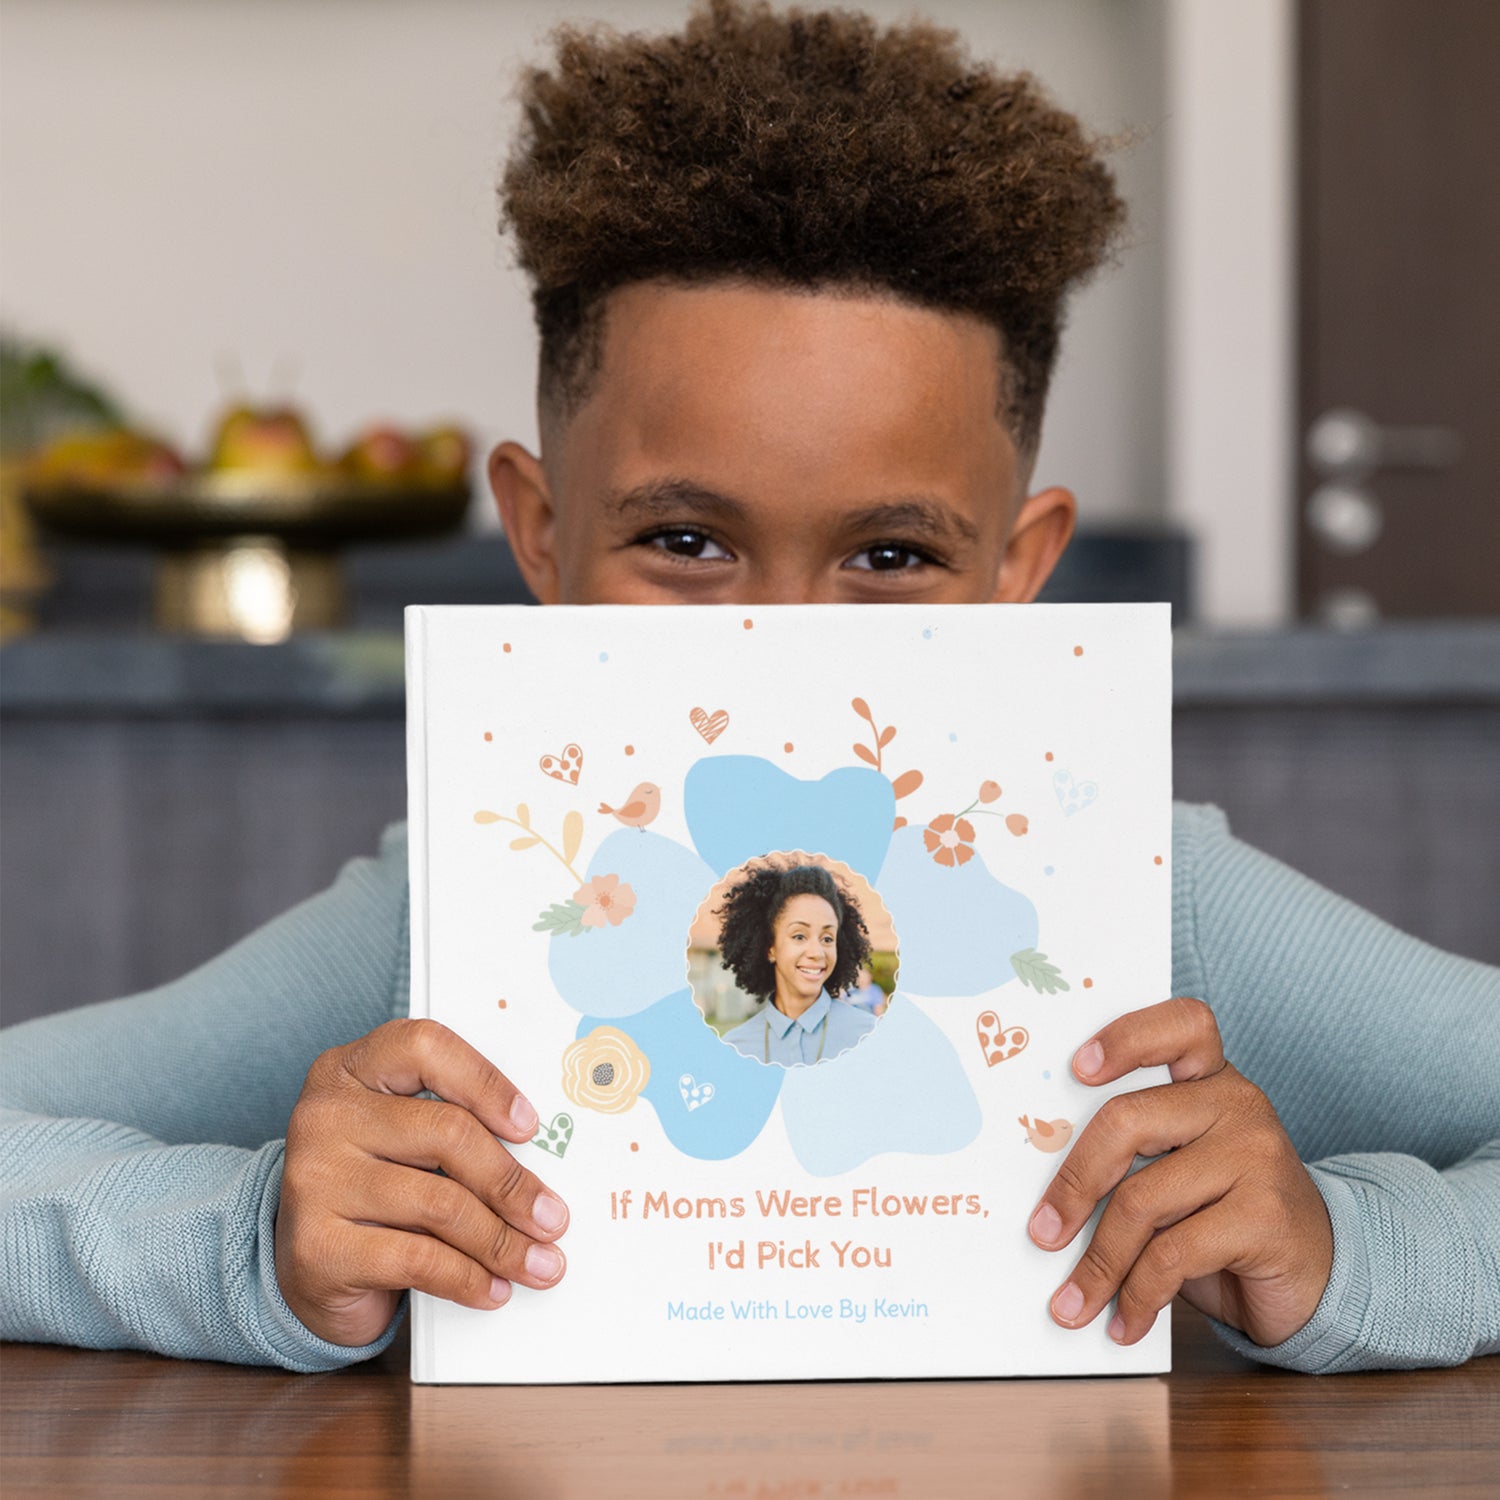 Personalized book for mom from kids by Luhvee Books